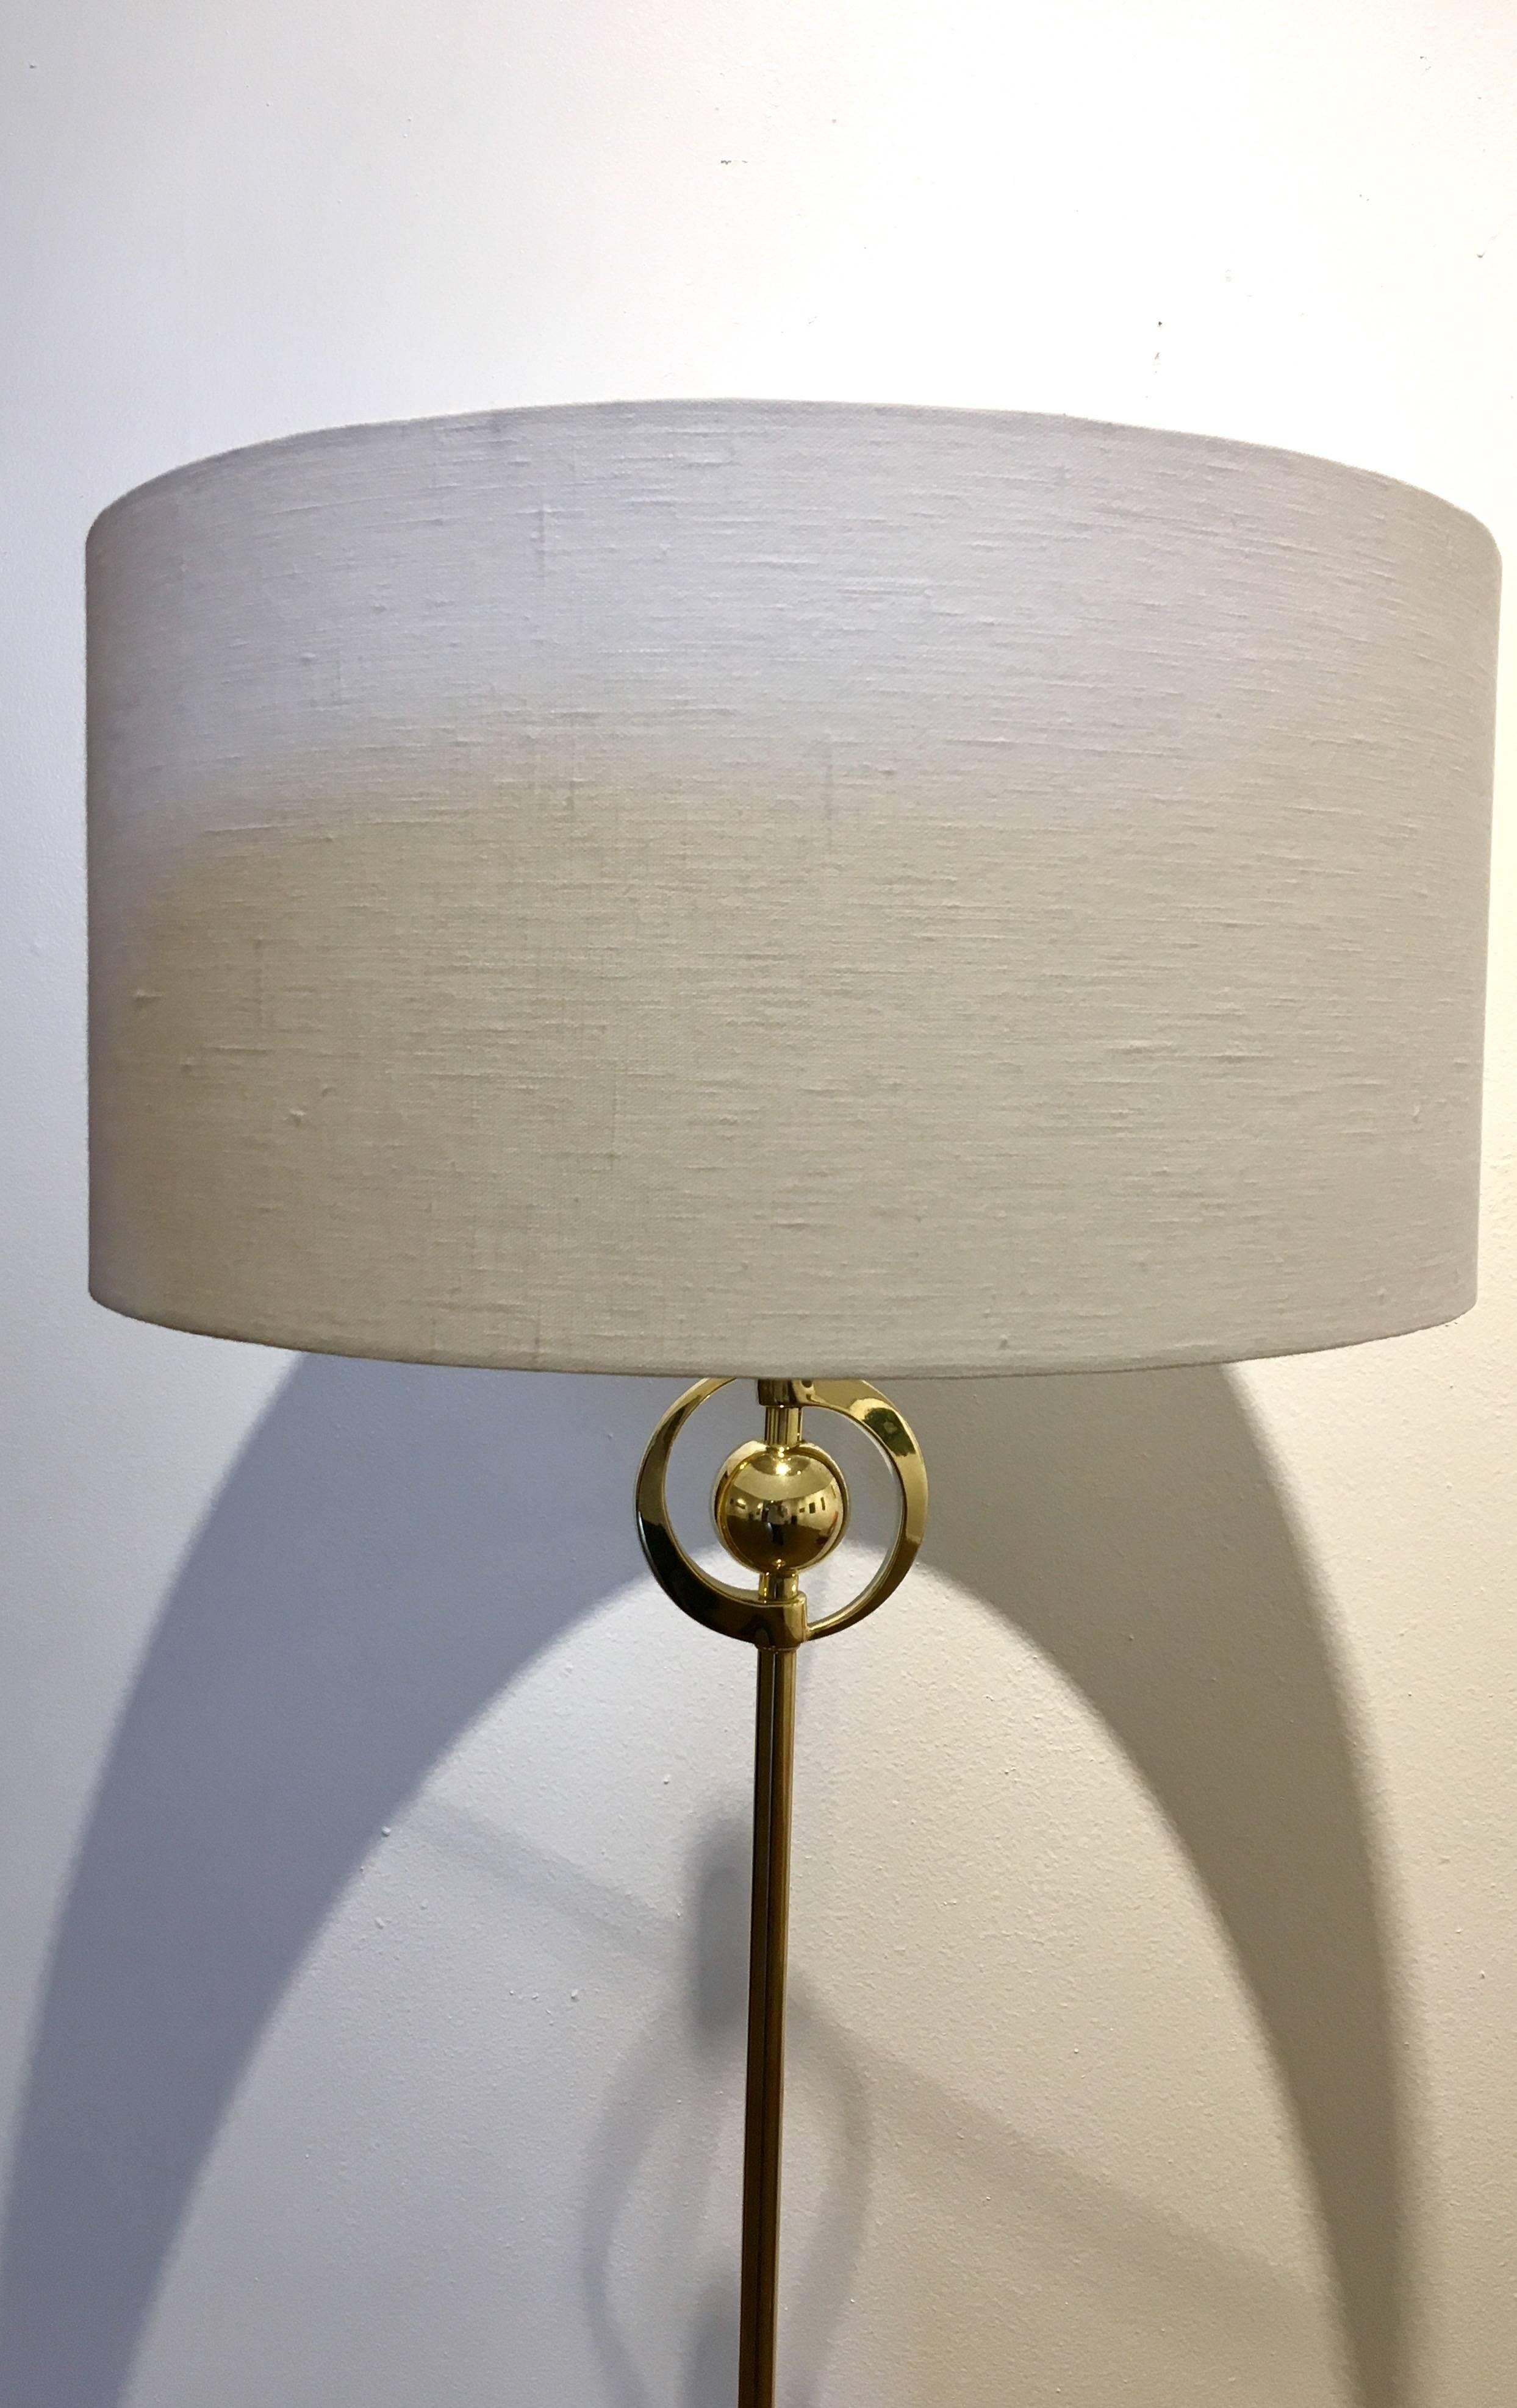 Beautiful and rare floor lamp, circa 1940s, polished brass rewired and new lampshade with new socket, we had to replace the old socket, great design. We put an Lucite finial.